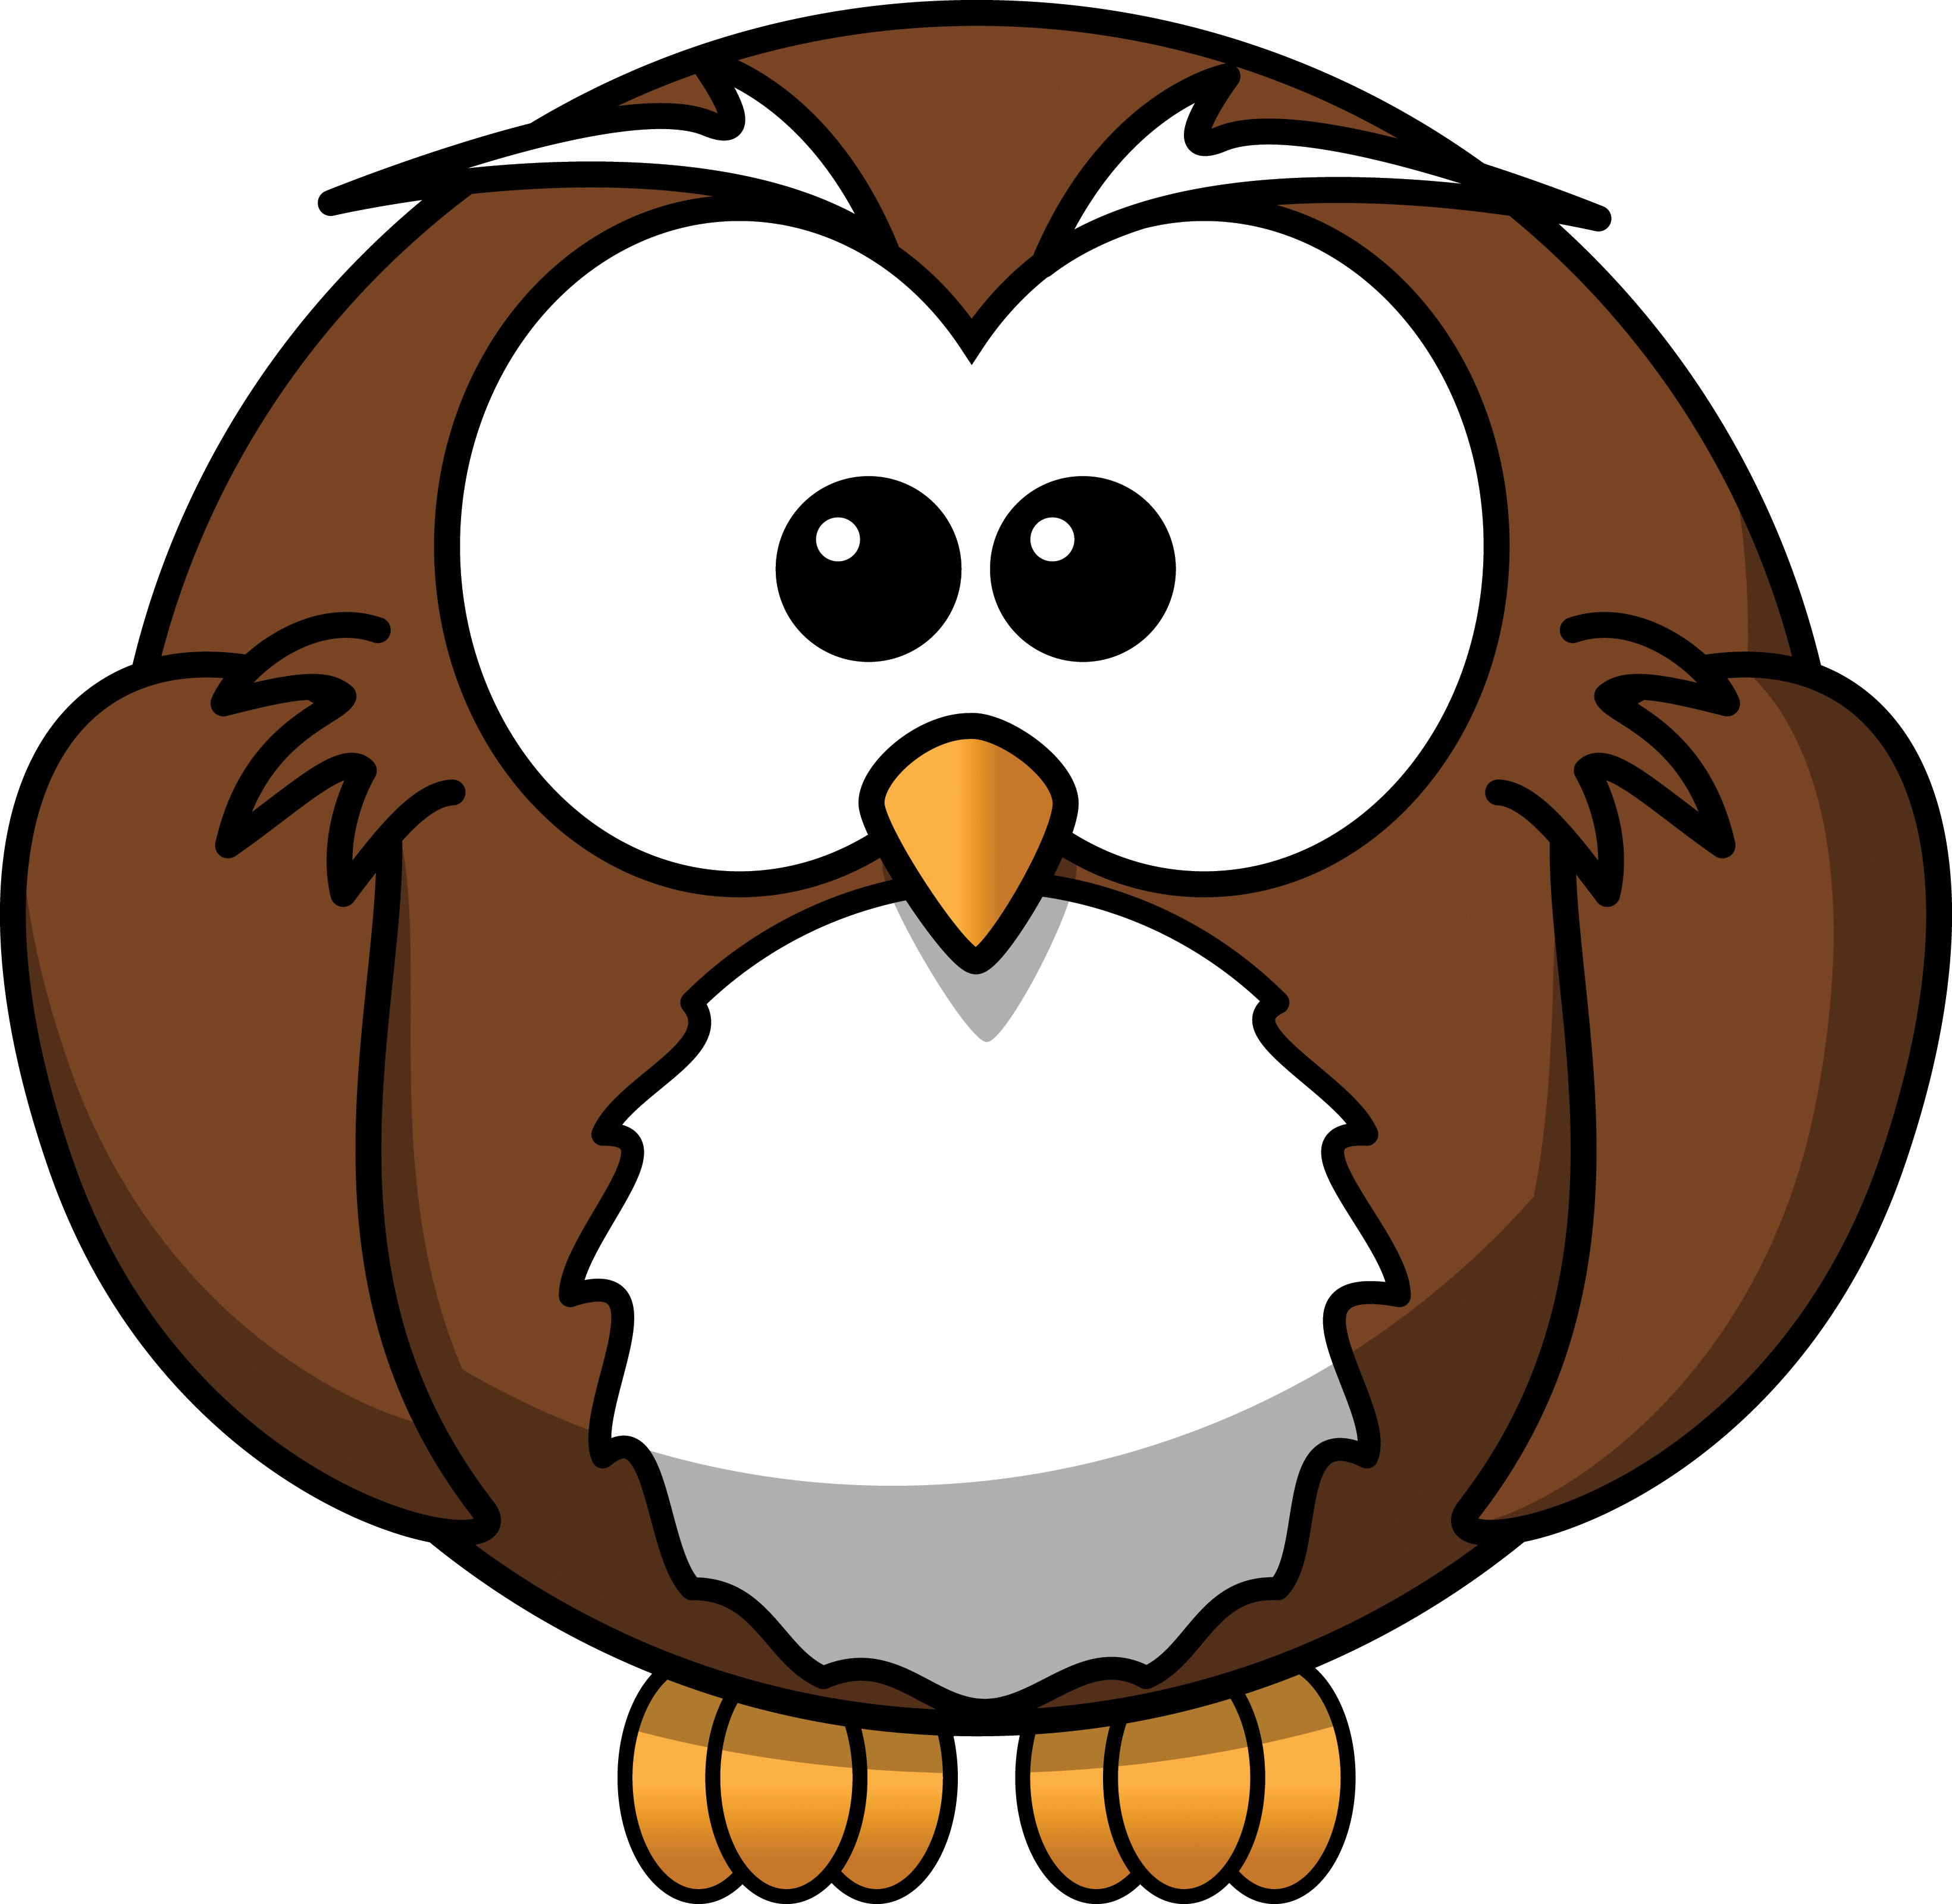 JPG PNG EPS AI SVG u0026middot; Free Cartoon Owl Coloring Page Clipart